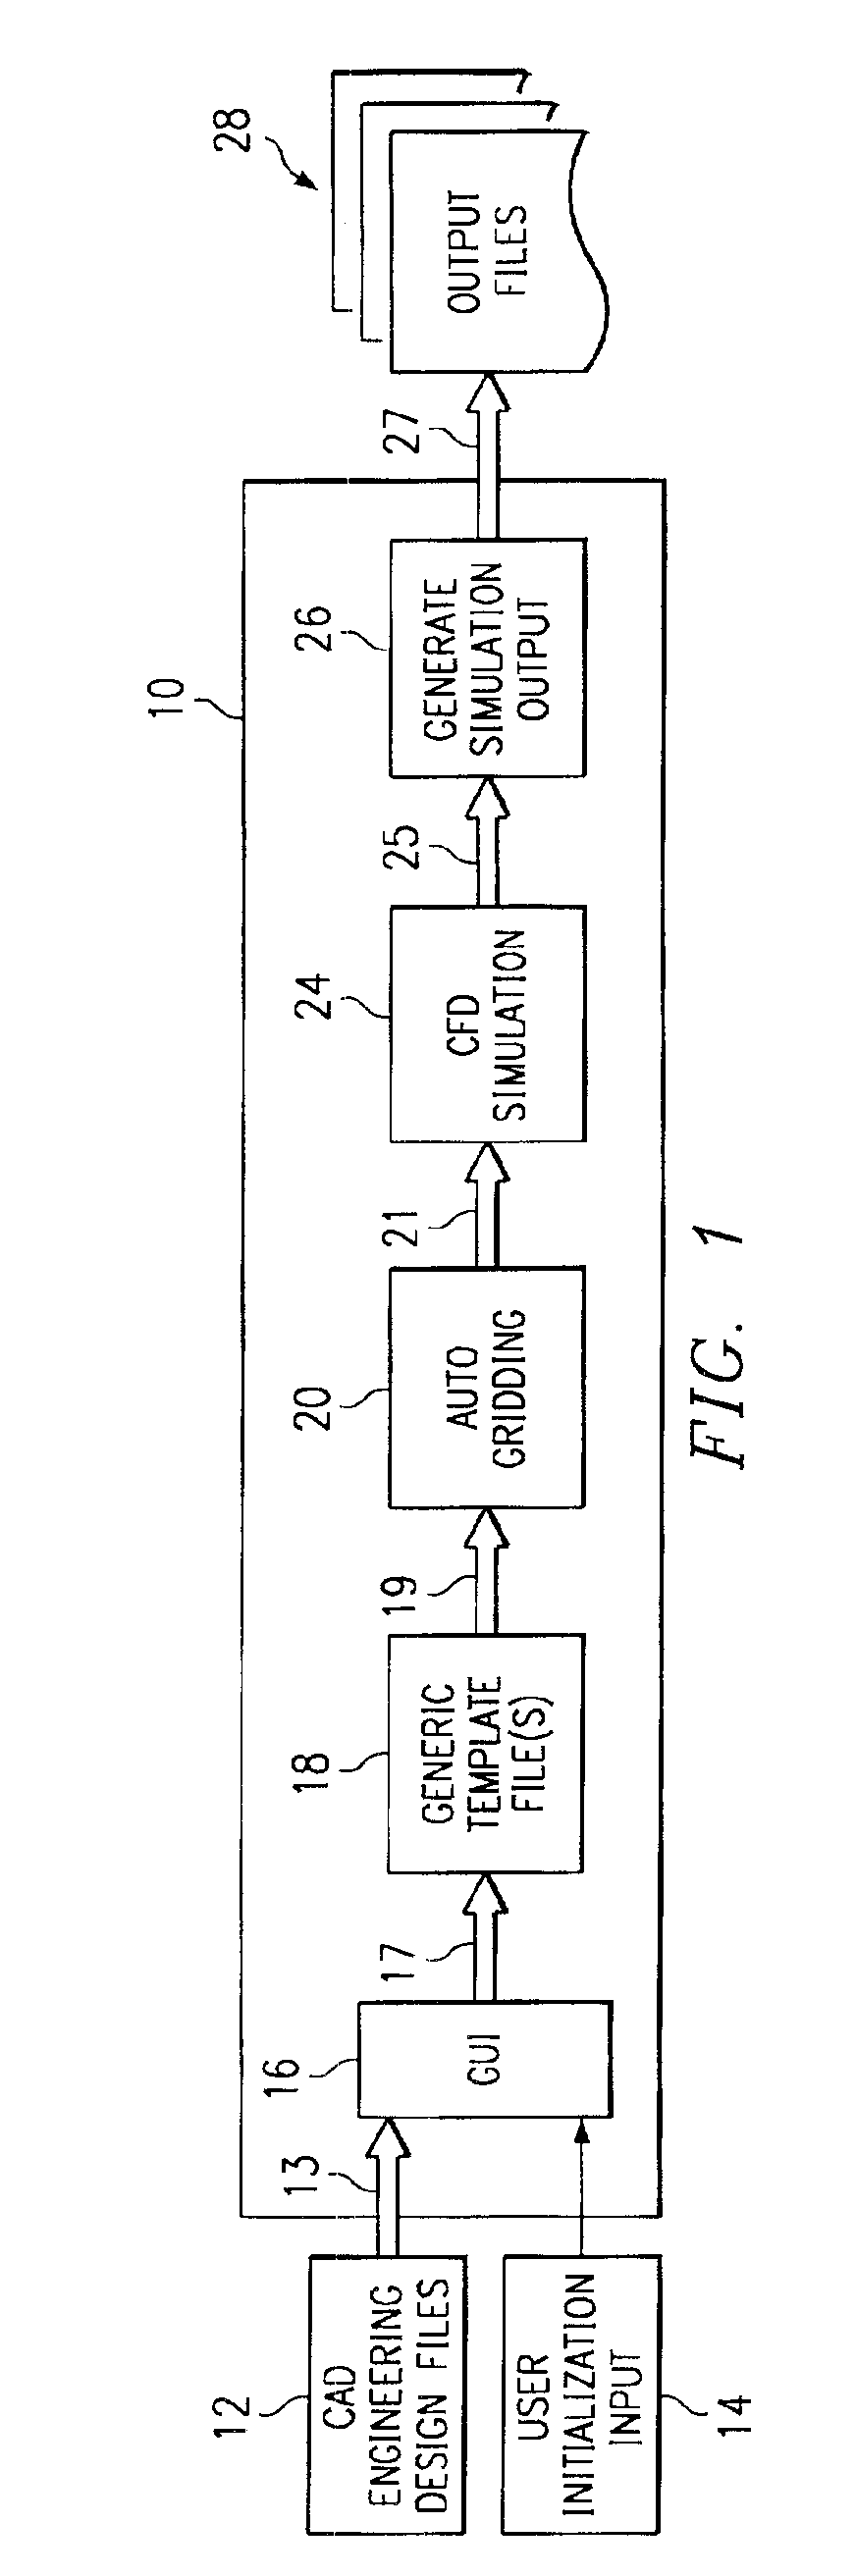 System and method of virtual flowbench simulation